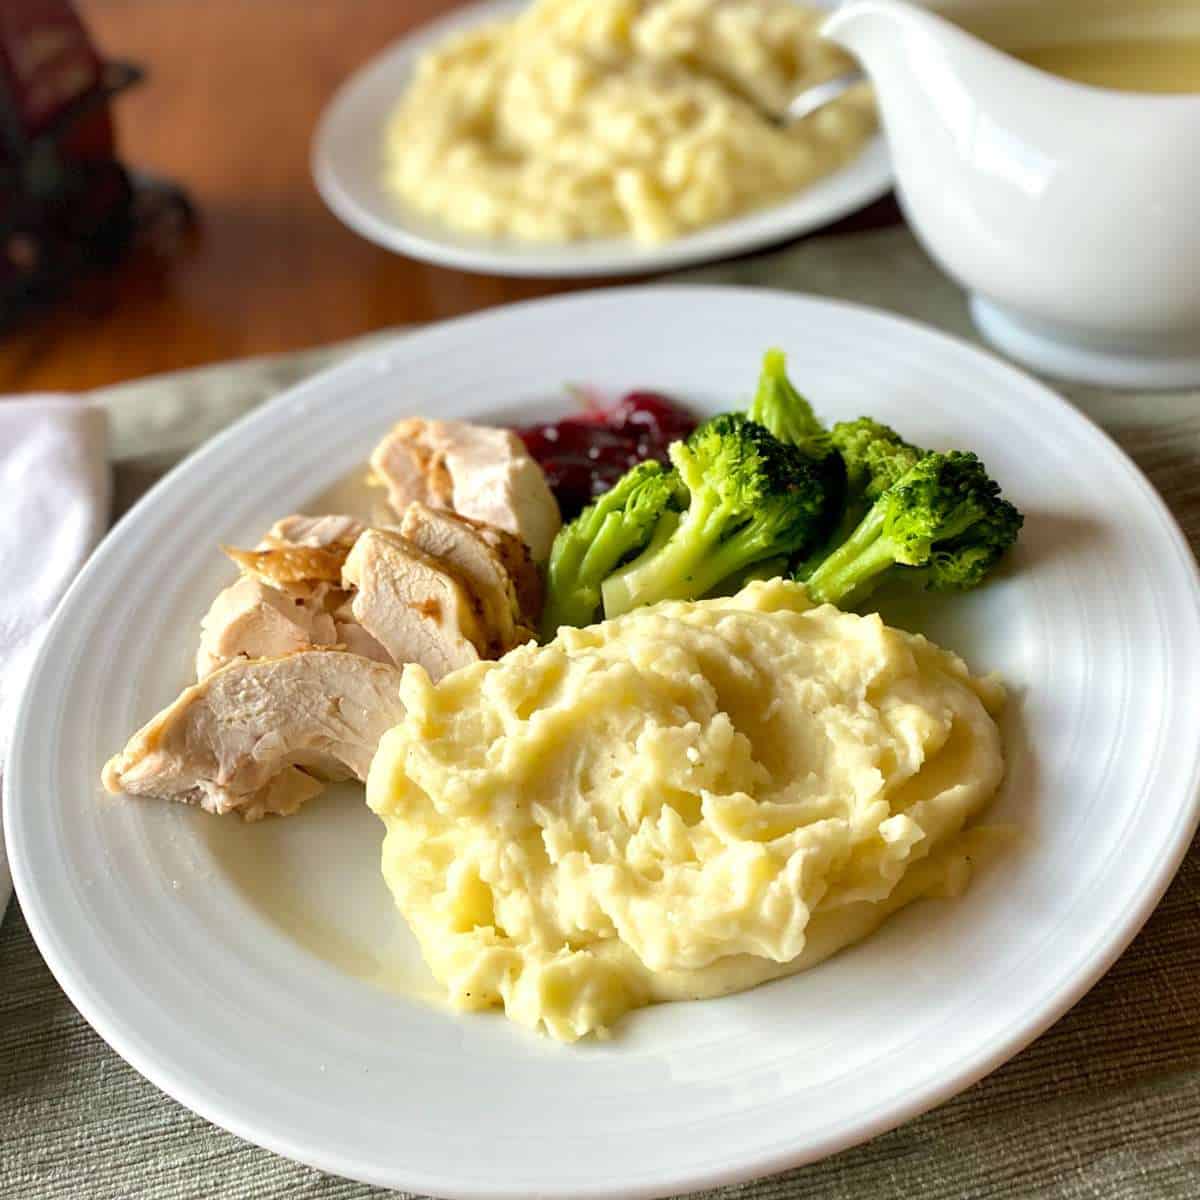 A dinner plate with dairy free mashed potatoes, roasted turkey, cranberry sauce, and broccoli.